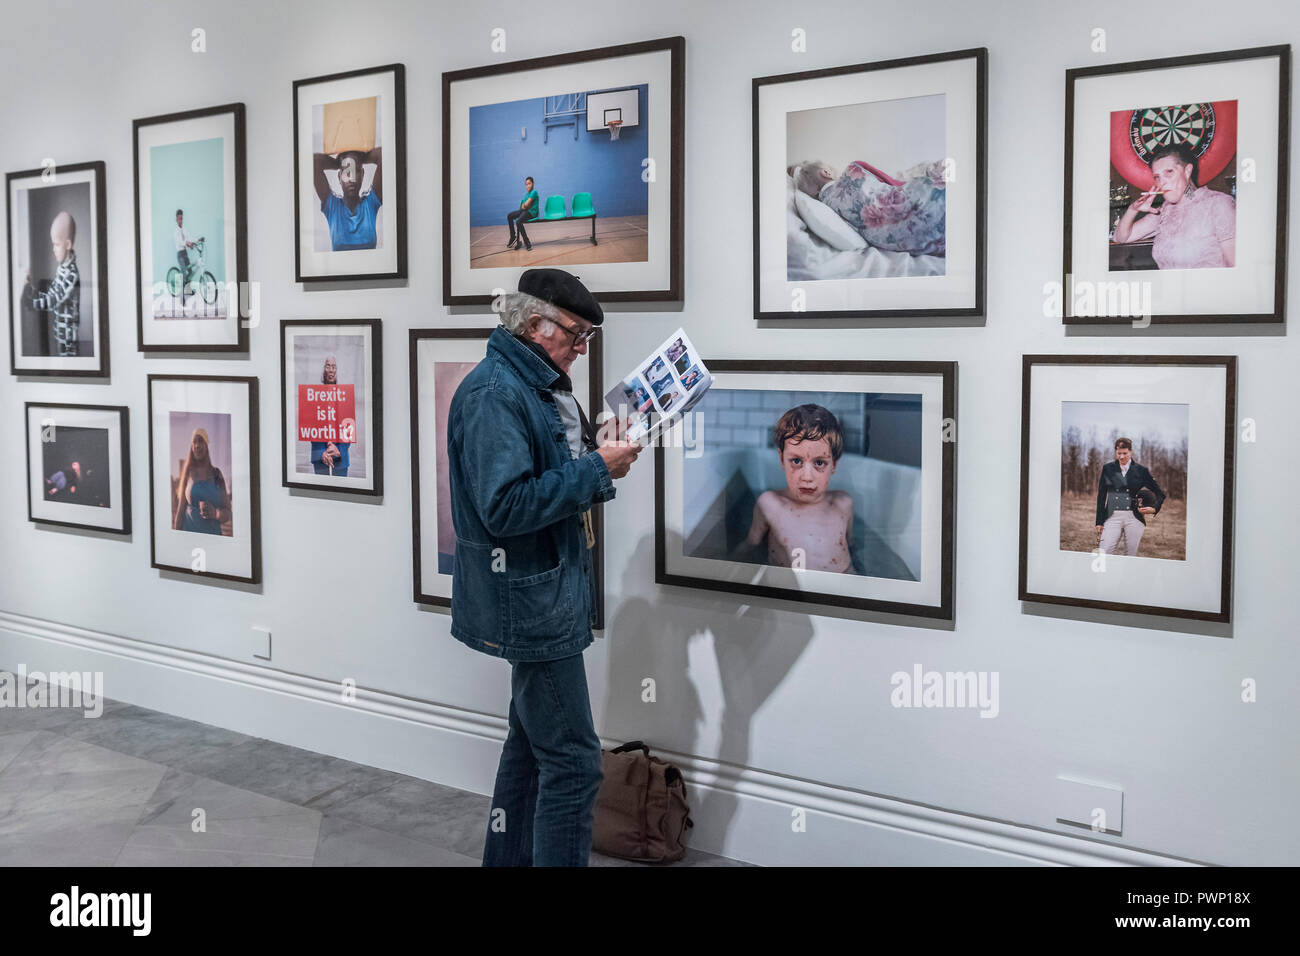 London, UK. 17th Oct, 2018. Shortlisted portraits on display at the National Portrait Gallery, London, as part of the Taylor Wessing Photographic Portrait Prize 2018 exhibition from 18 October 2018 to 27 January 2019. Credit: Guy Bell/Alamy Live News Stock Photo